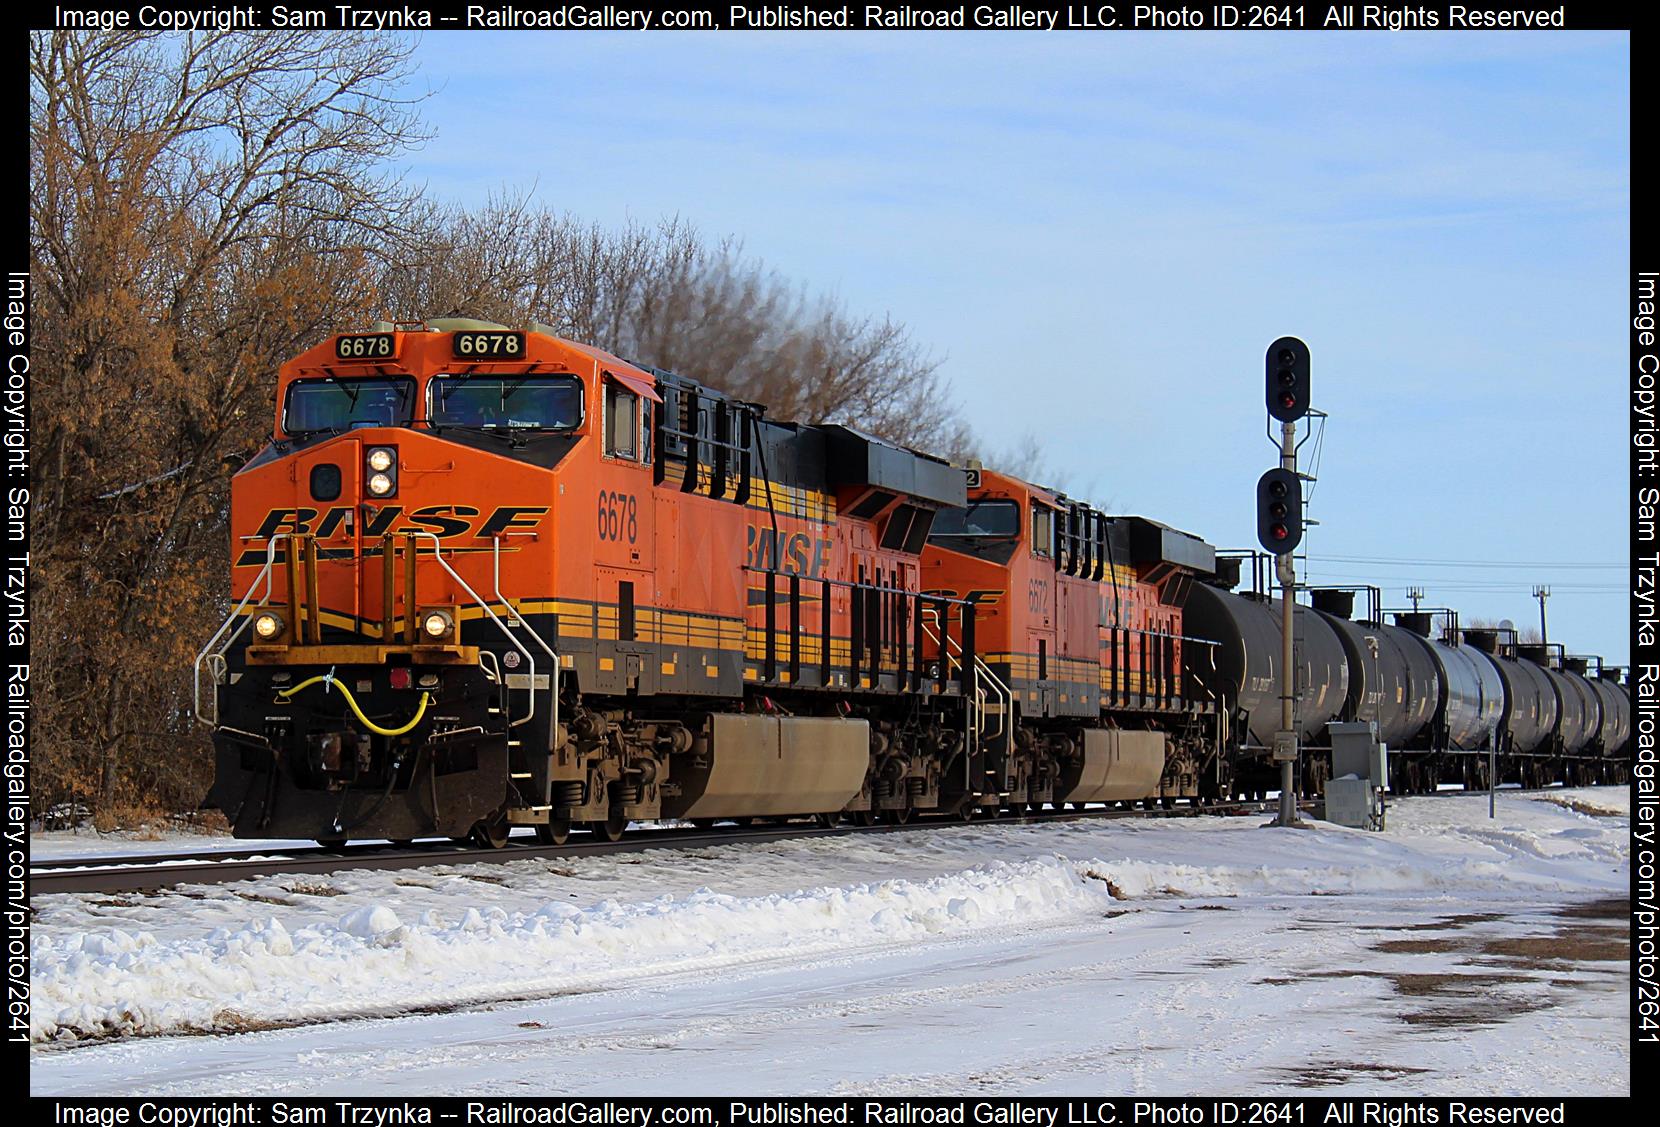 BNSF 6678 is a class GE ES44C4 and  is pictured in Steele, North Dakota, USA.  This was taken along the BNSF Jamestown Subdivision on the BNSF Railway. Photo Copyright: Sam Trzynka uploaded to Railroad Gallery on 12/12/2023. This photograph of BNSF 6678 was taken on Friday, November 25, 2022. All Rights Reserved. 